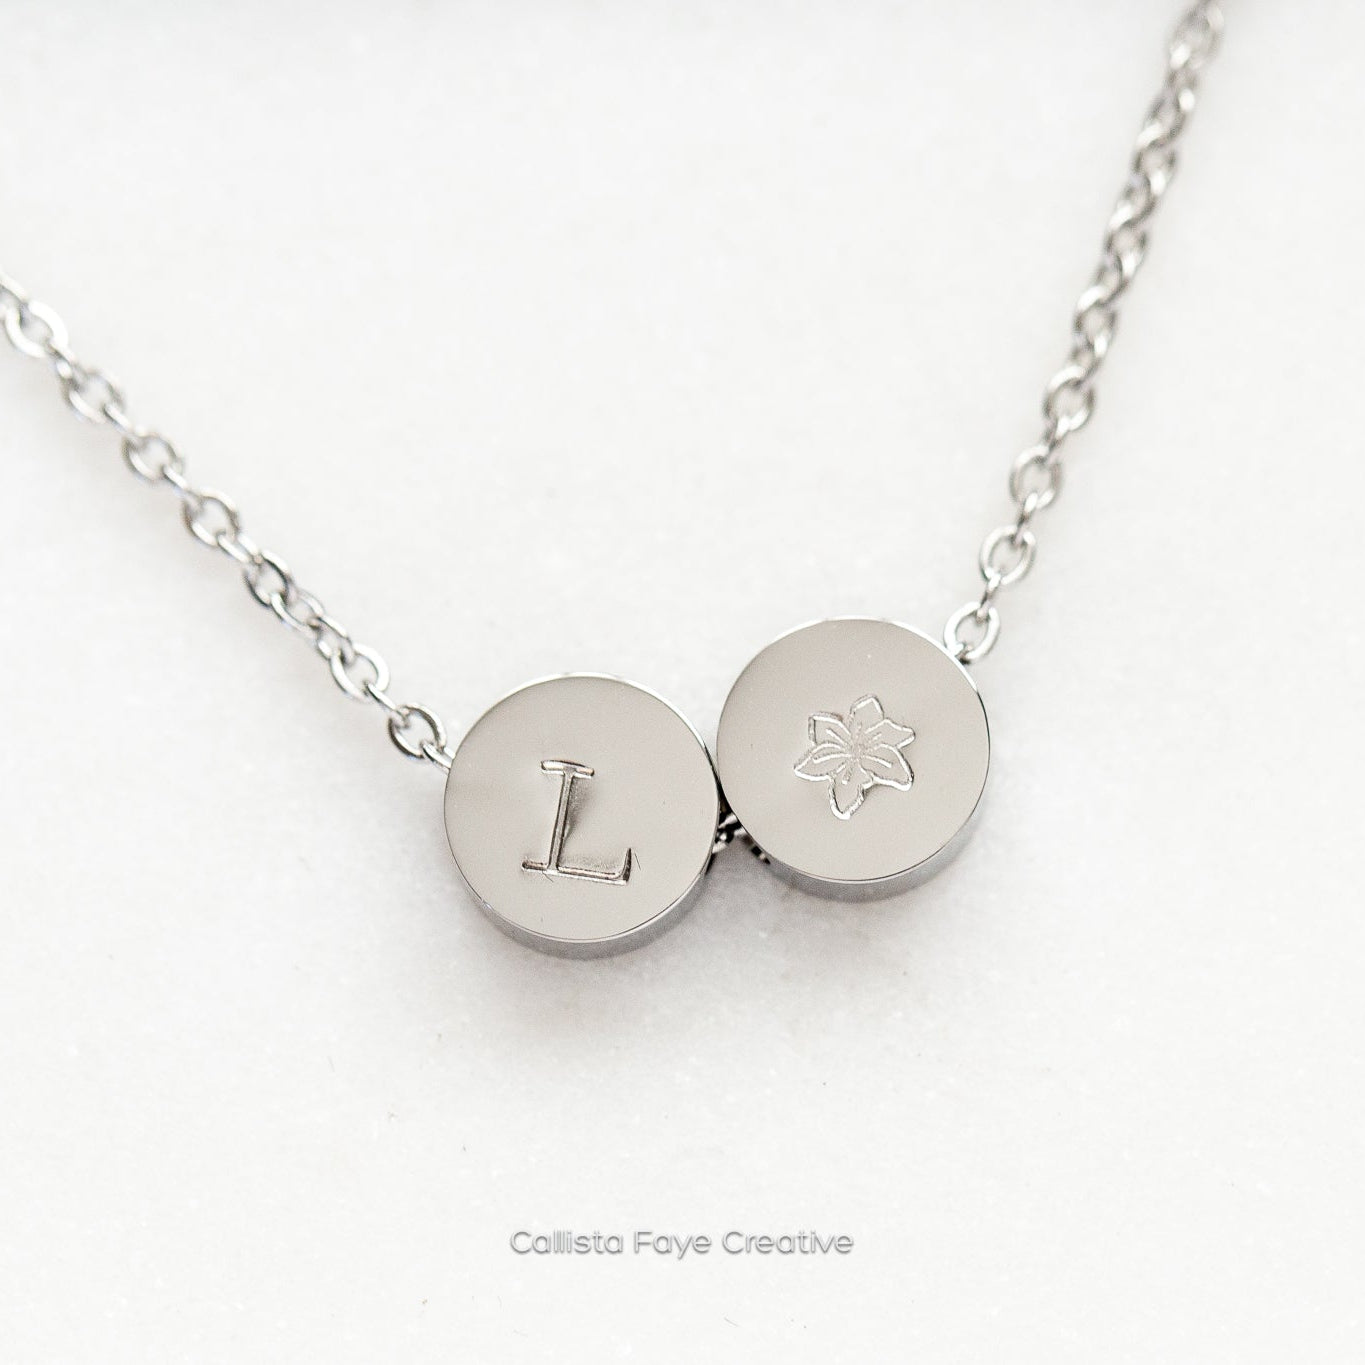 Custom Initial, Birth Flower Mini Coin Bead Necklace, Personalized Necklaces callistafaye 2 Beads Silver 